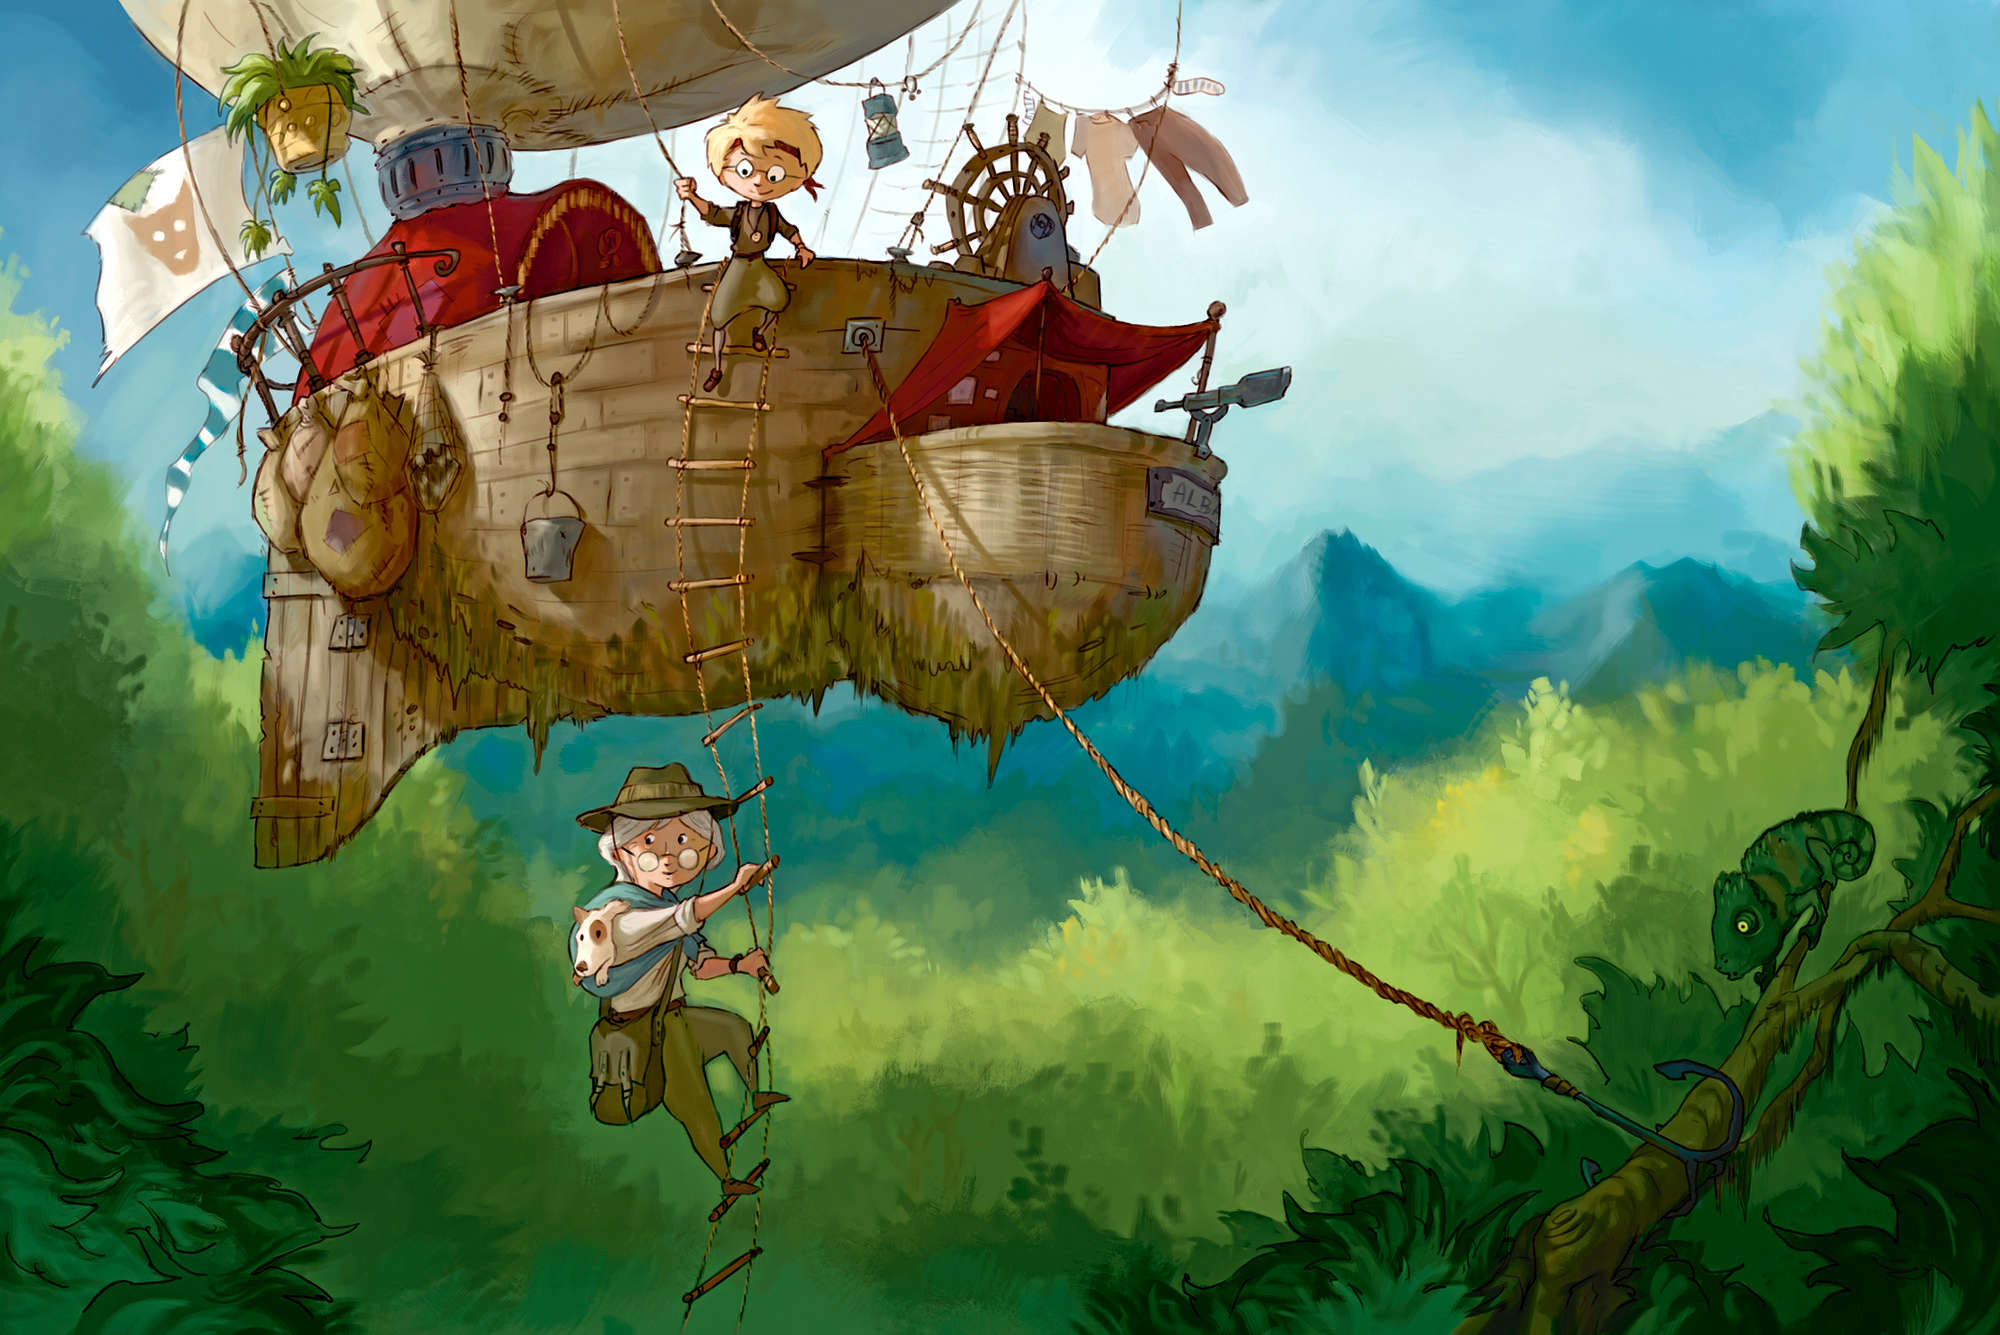             Children mural adventurer with flying ship on textured non-woven
        